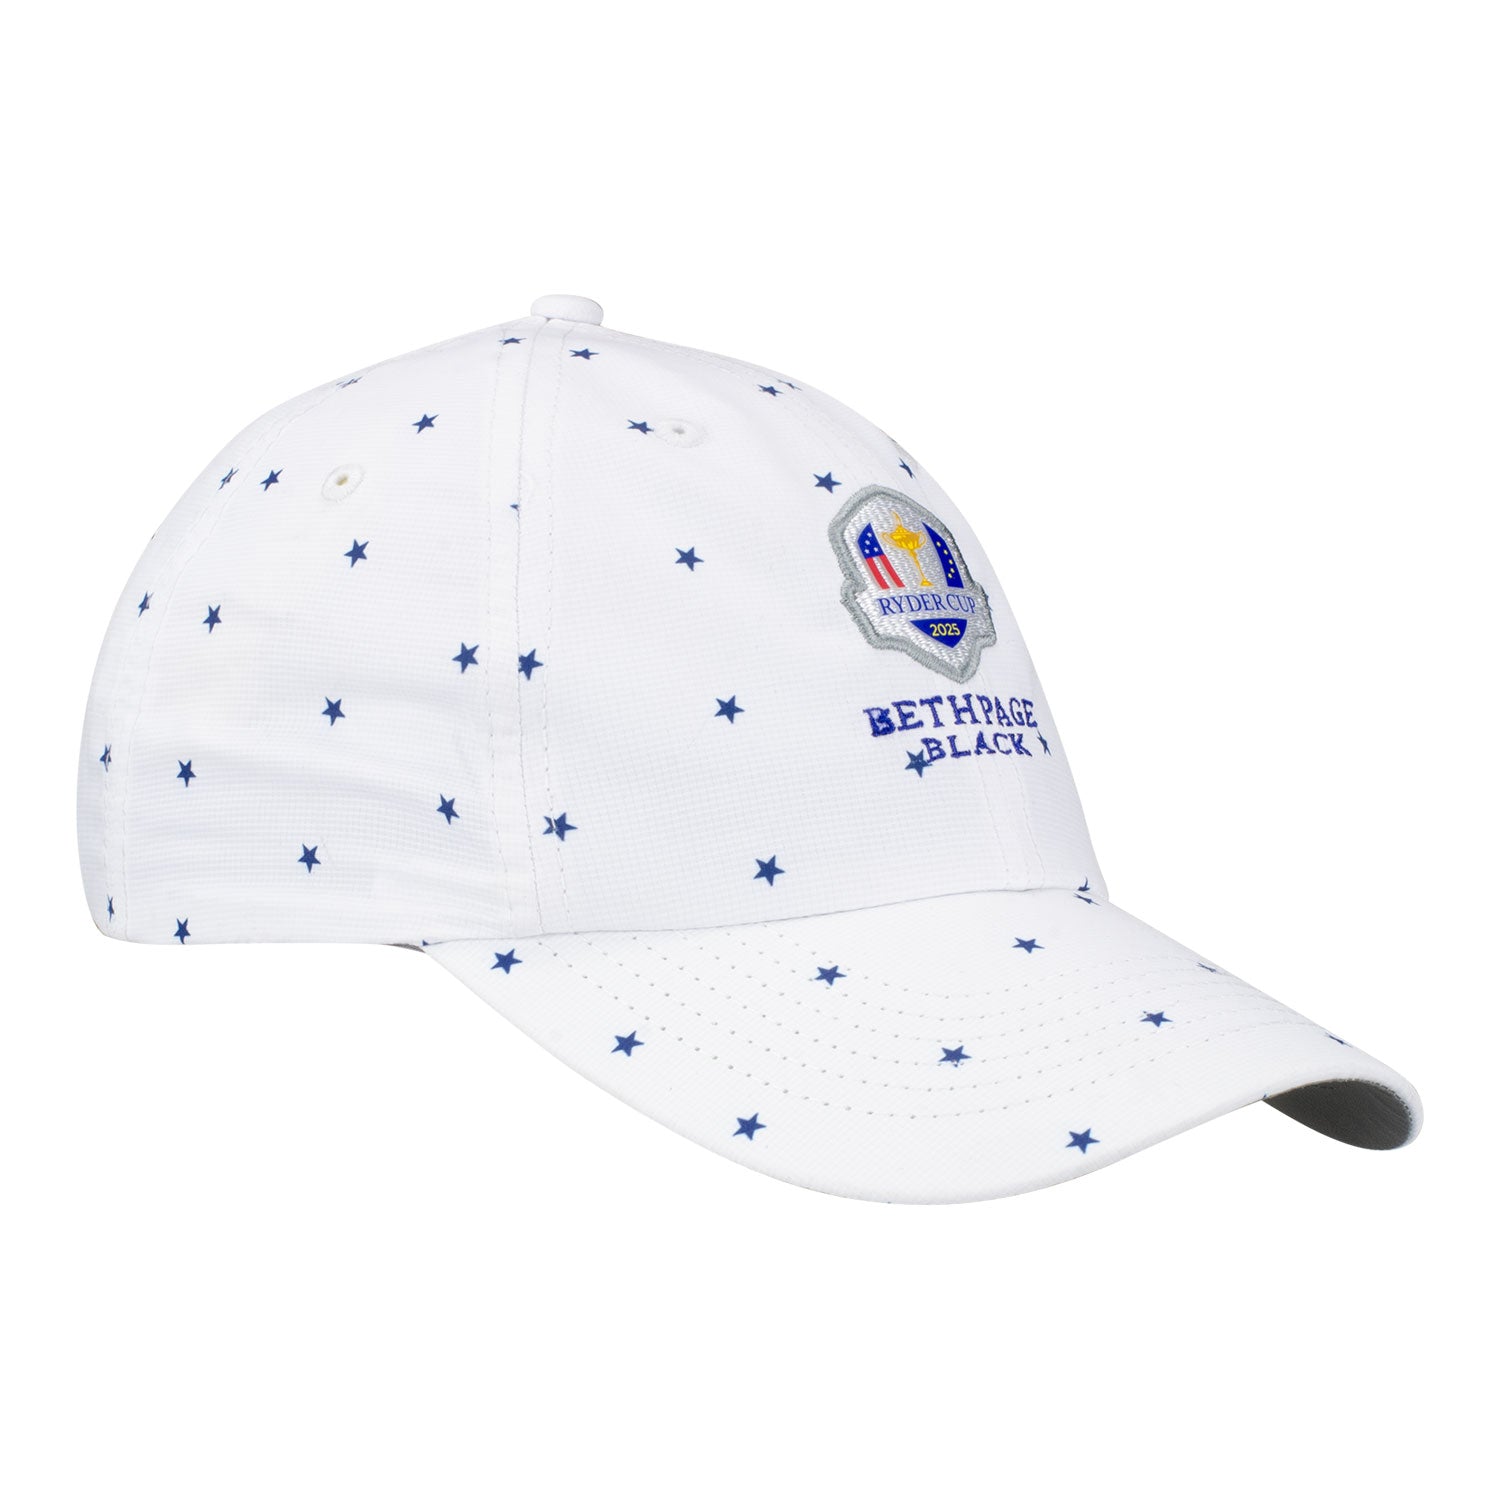 Imperial 2025 Ryder Cup Original Performance Hat in White Star Pattern - Angled Front Left View